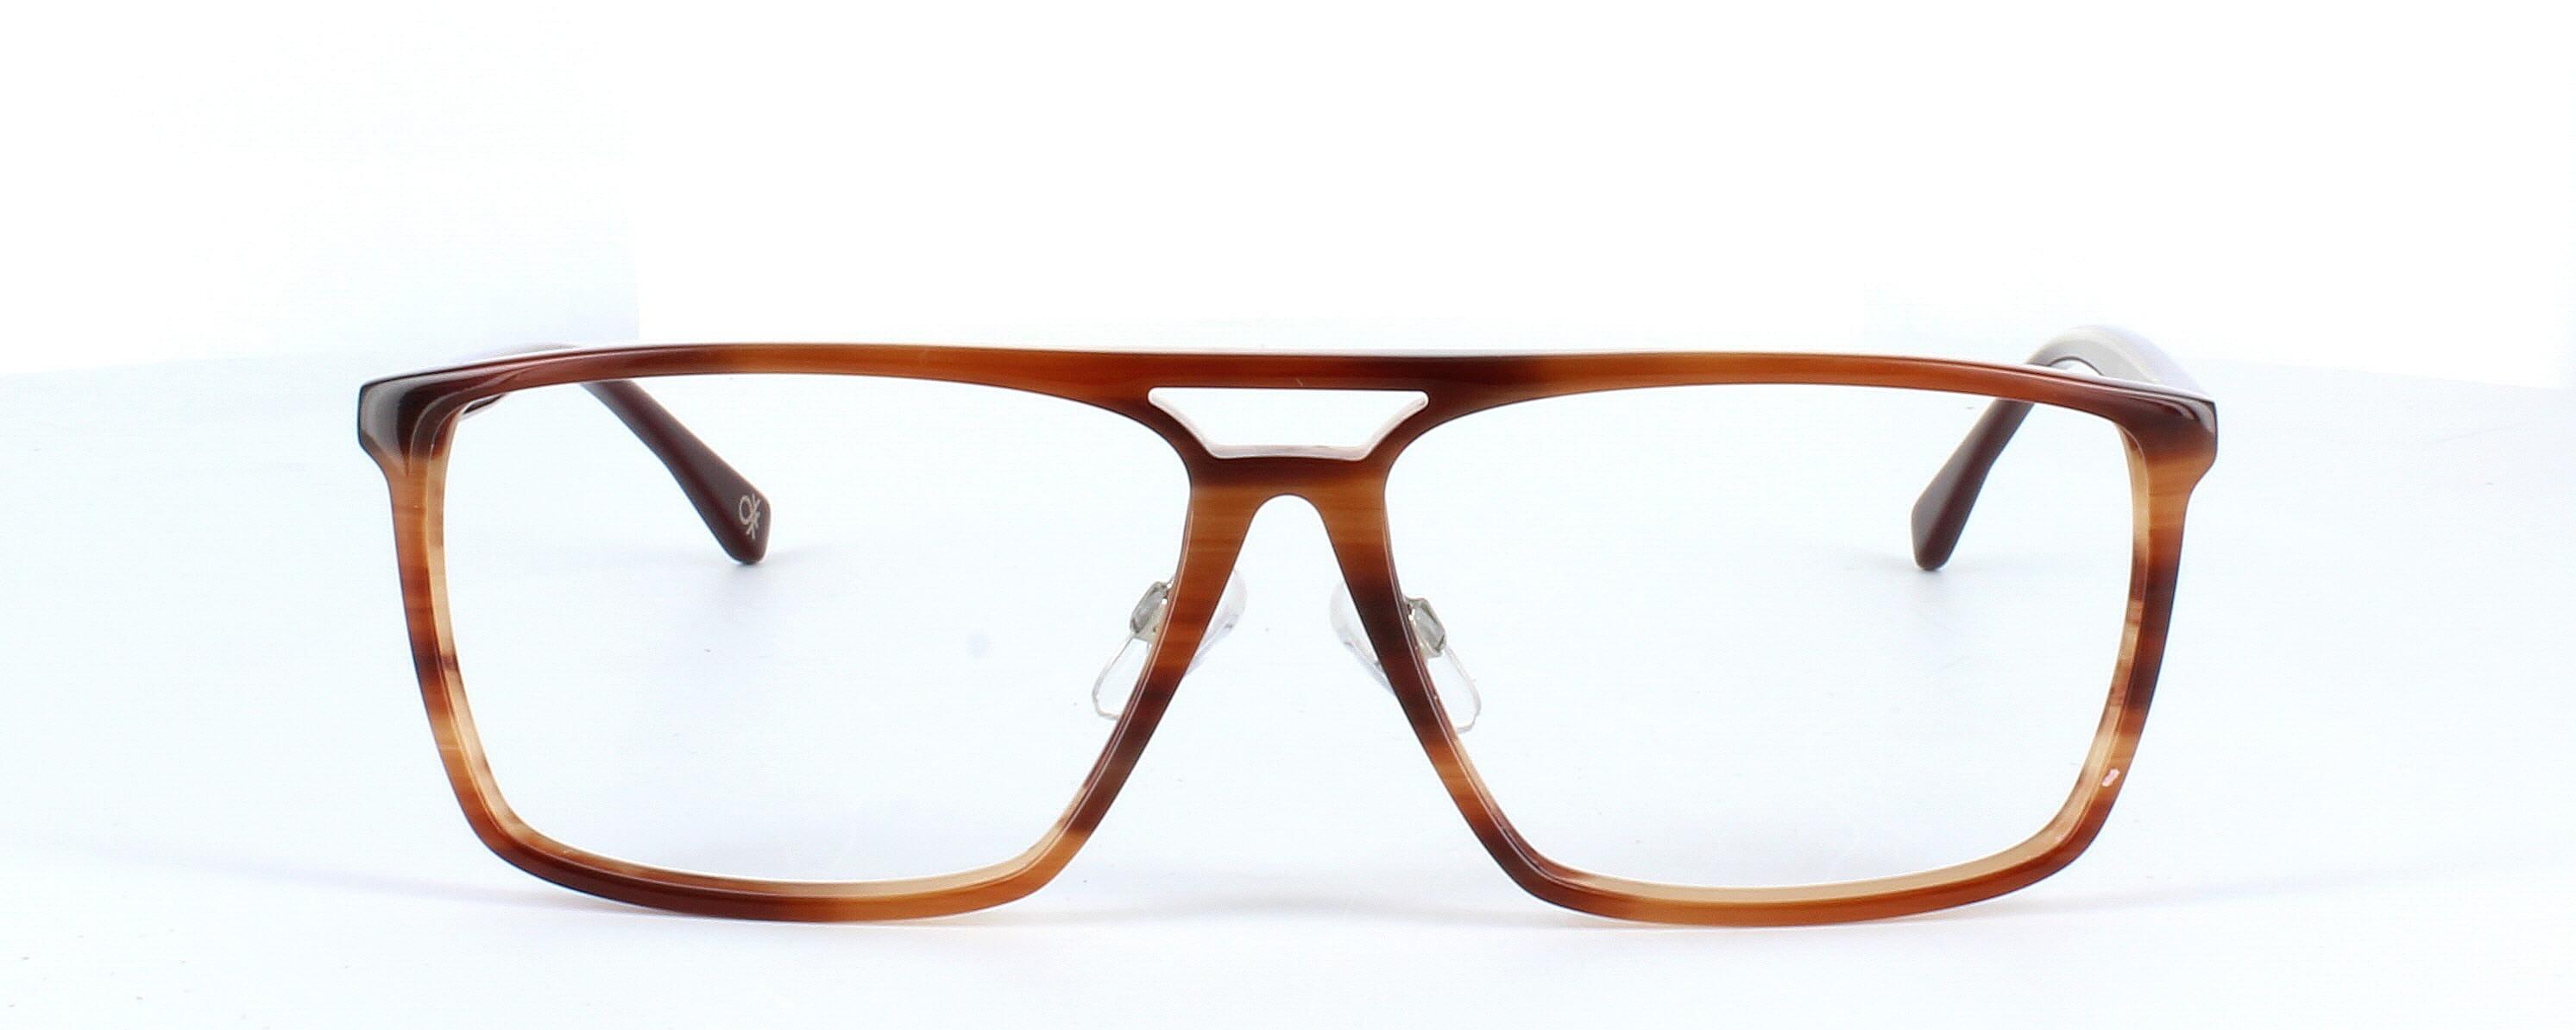 Benetton BE1O000 151 - Gents designer hand made acetate frame with tortoise face and brown arms - image view 2